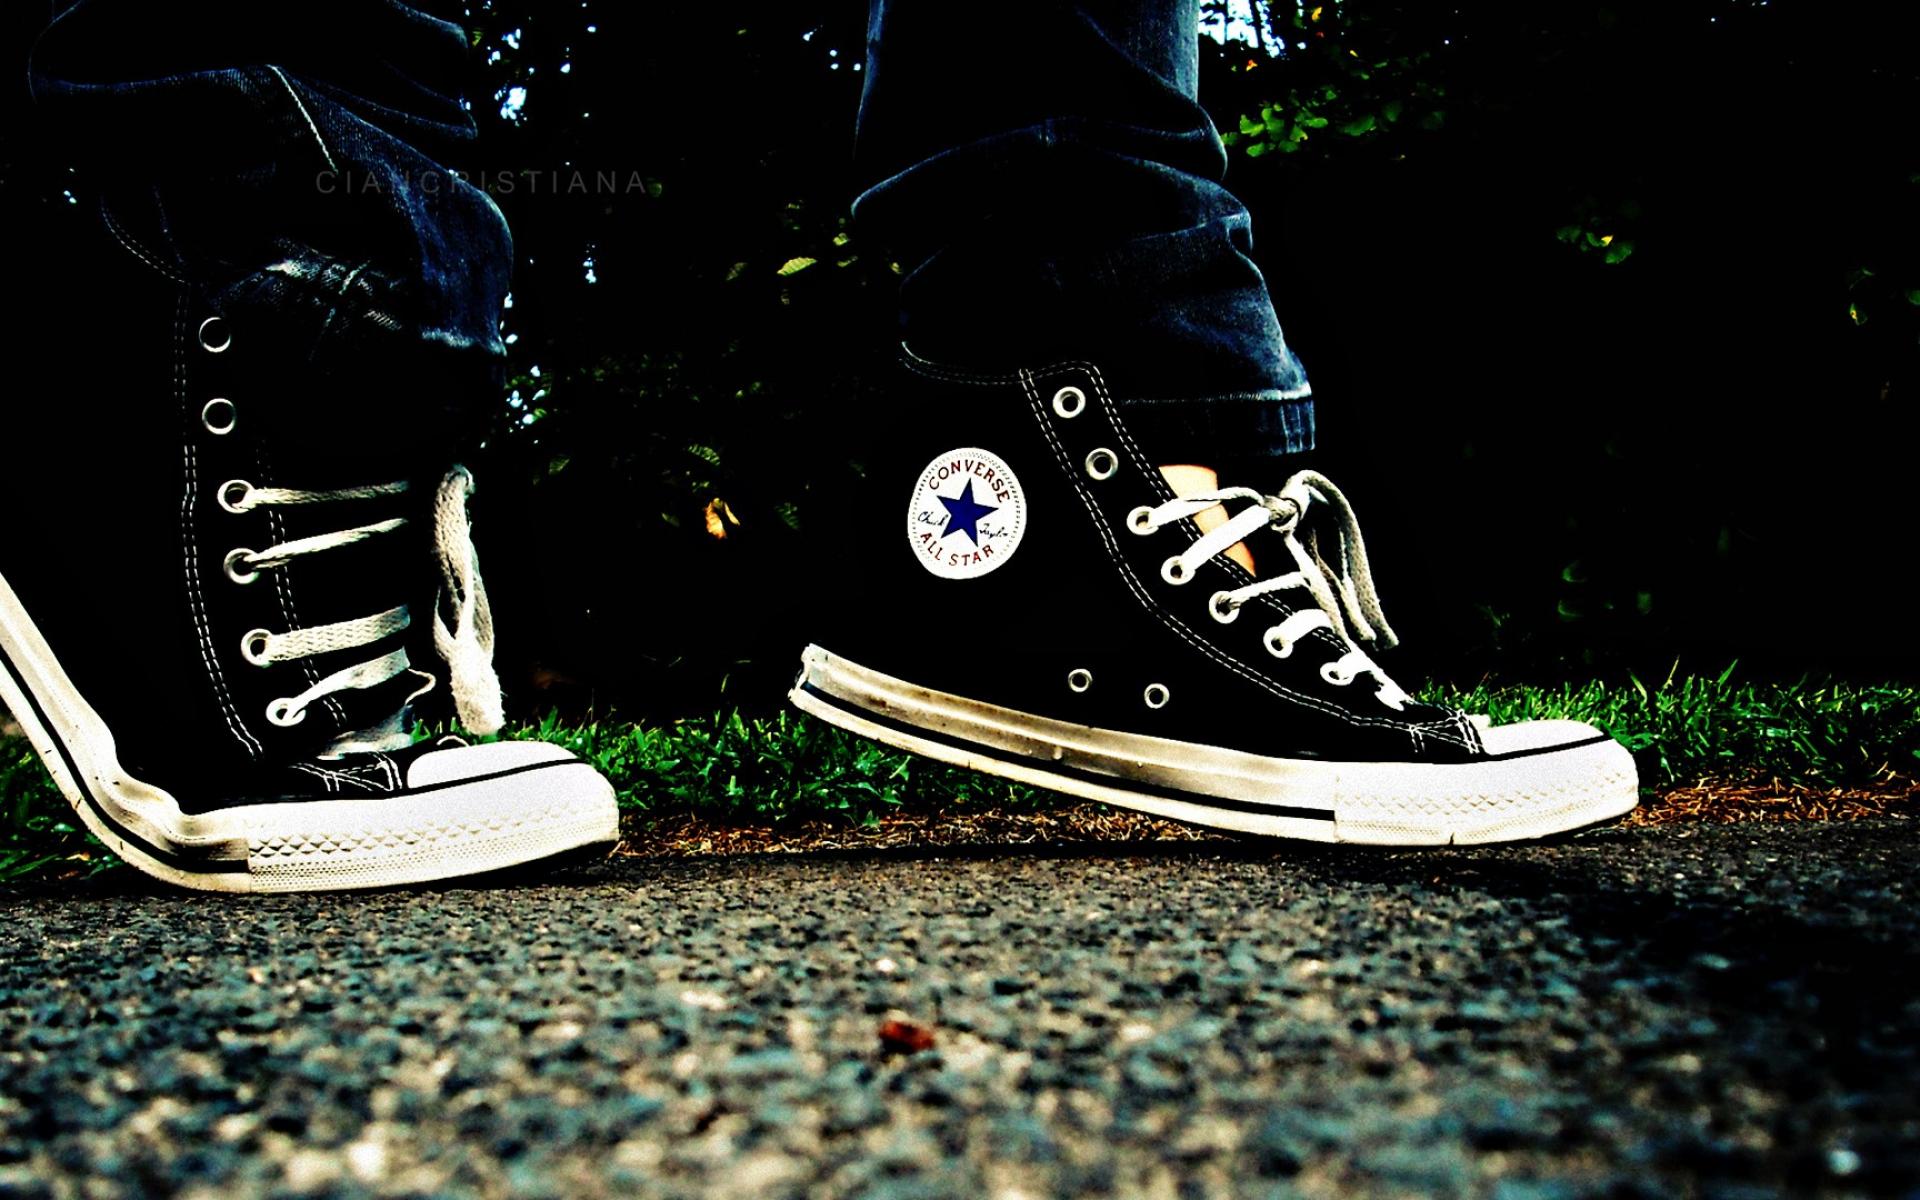 converse shoes background